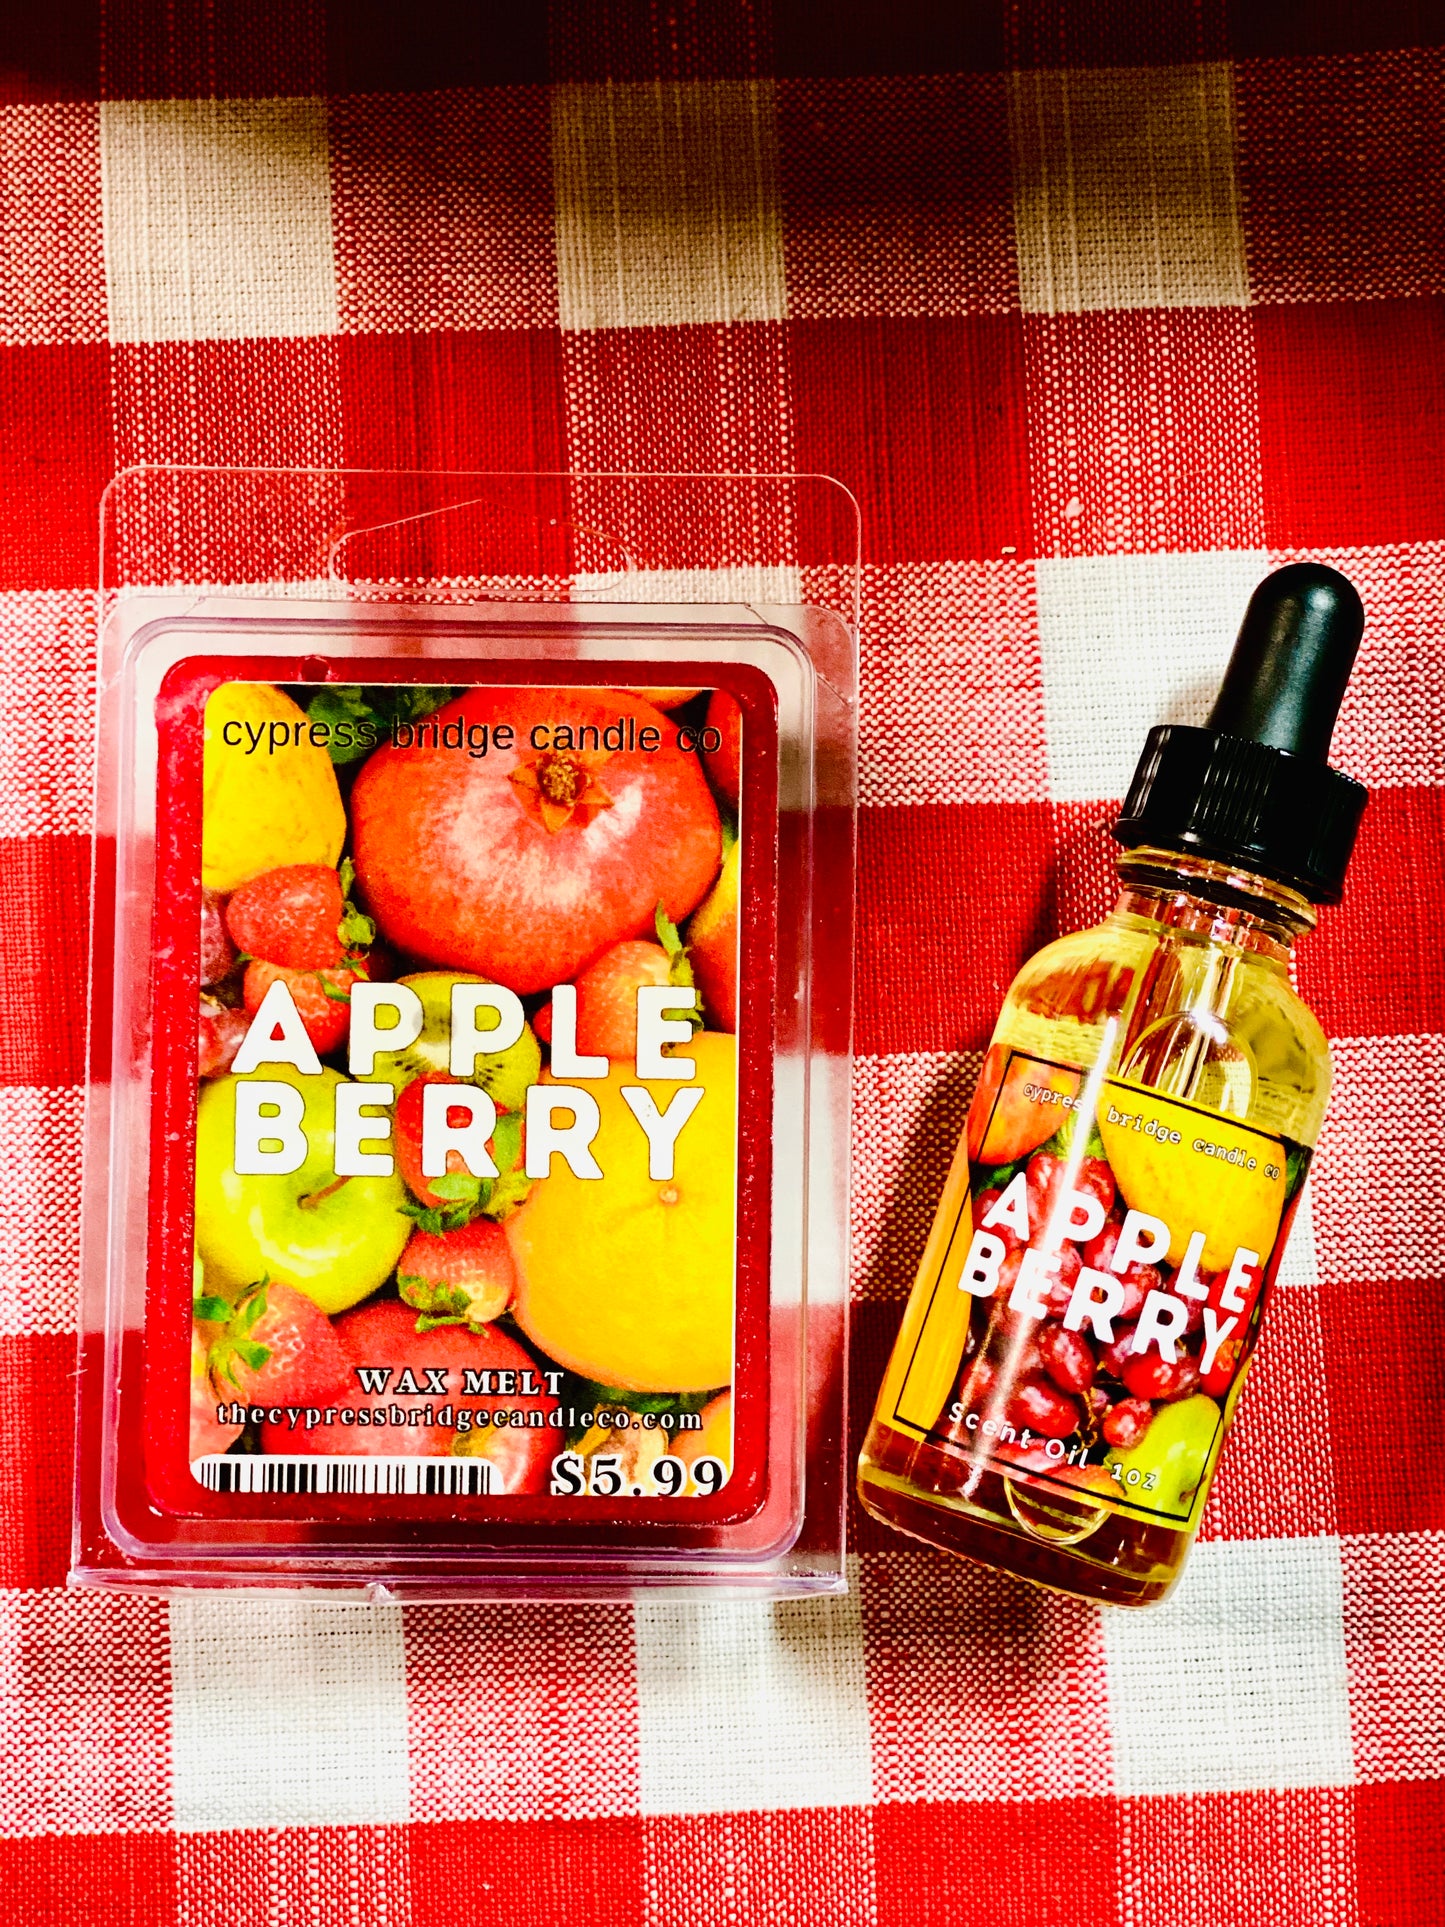 APPLE BERRY COLLECTION